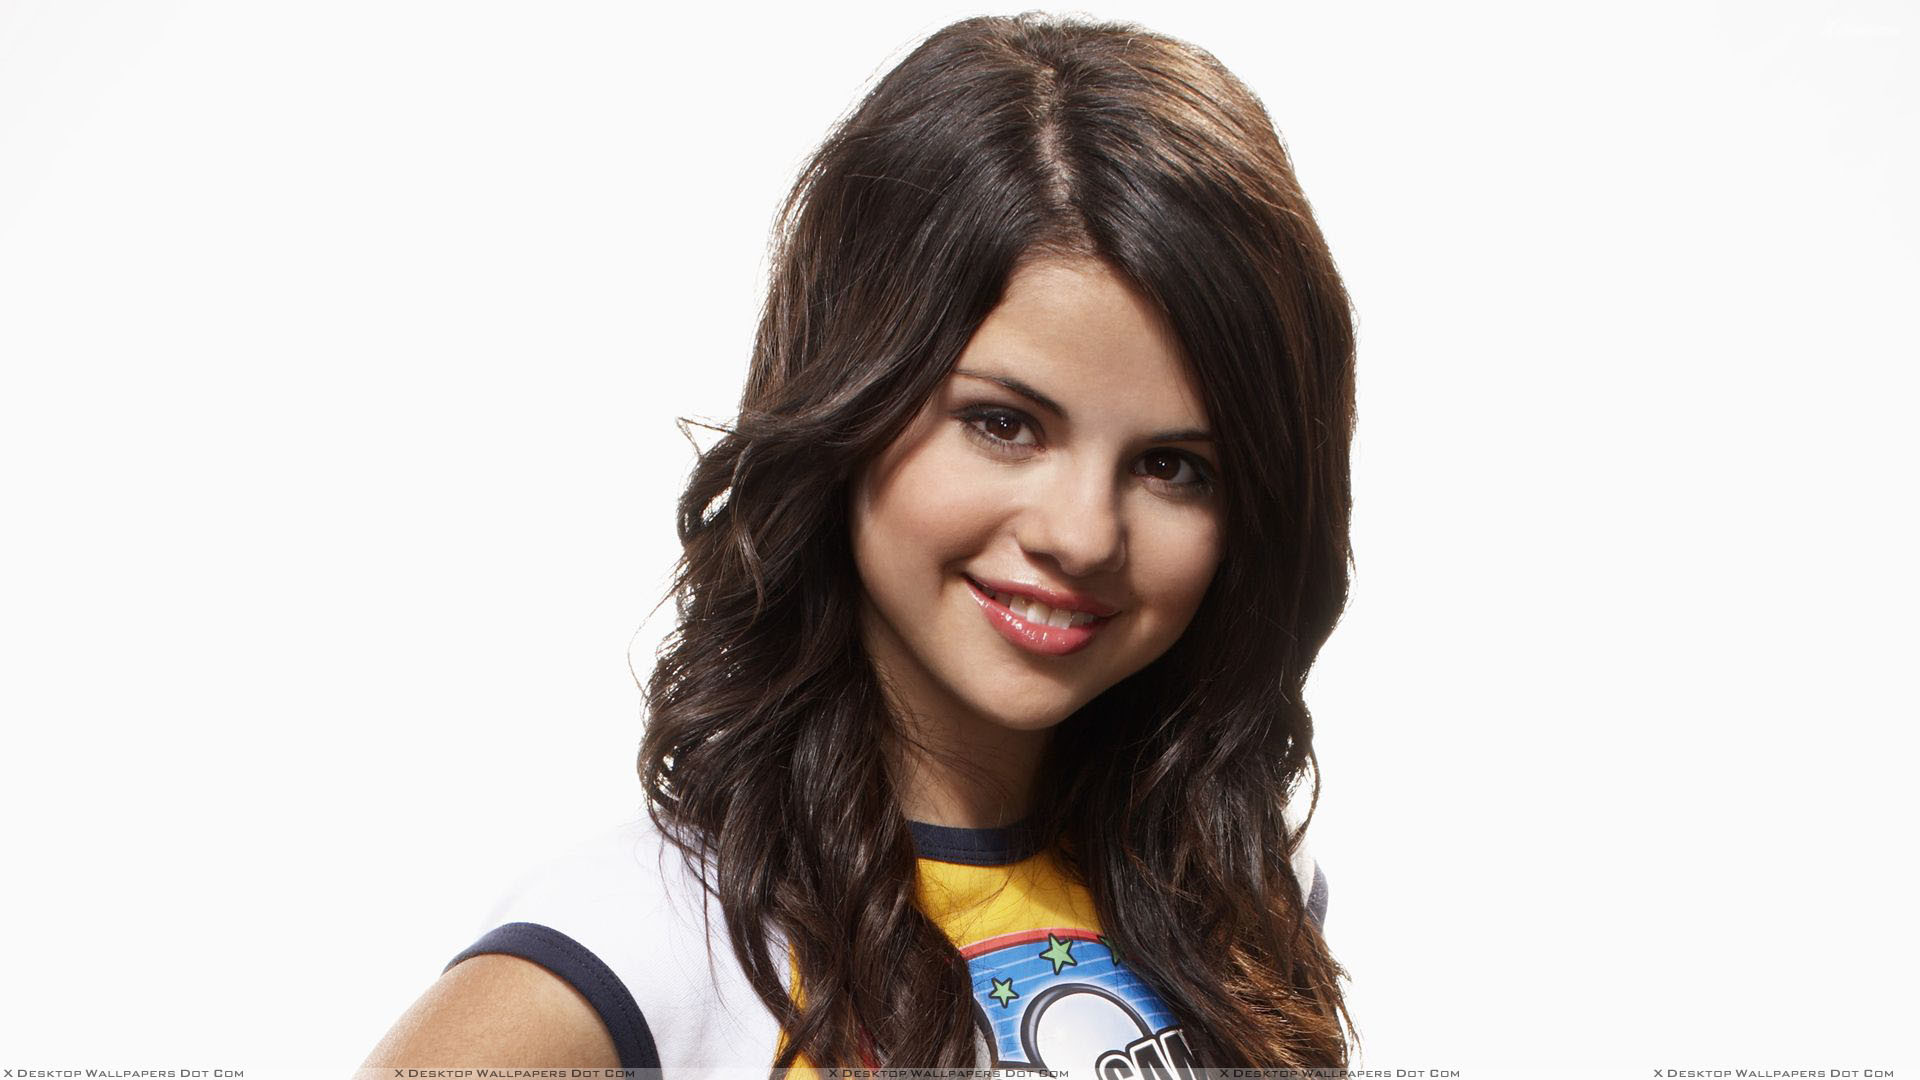 1920x1080 You are viewing wallpaper titled "Selena Gomez Cute Smiling Face ...